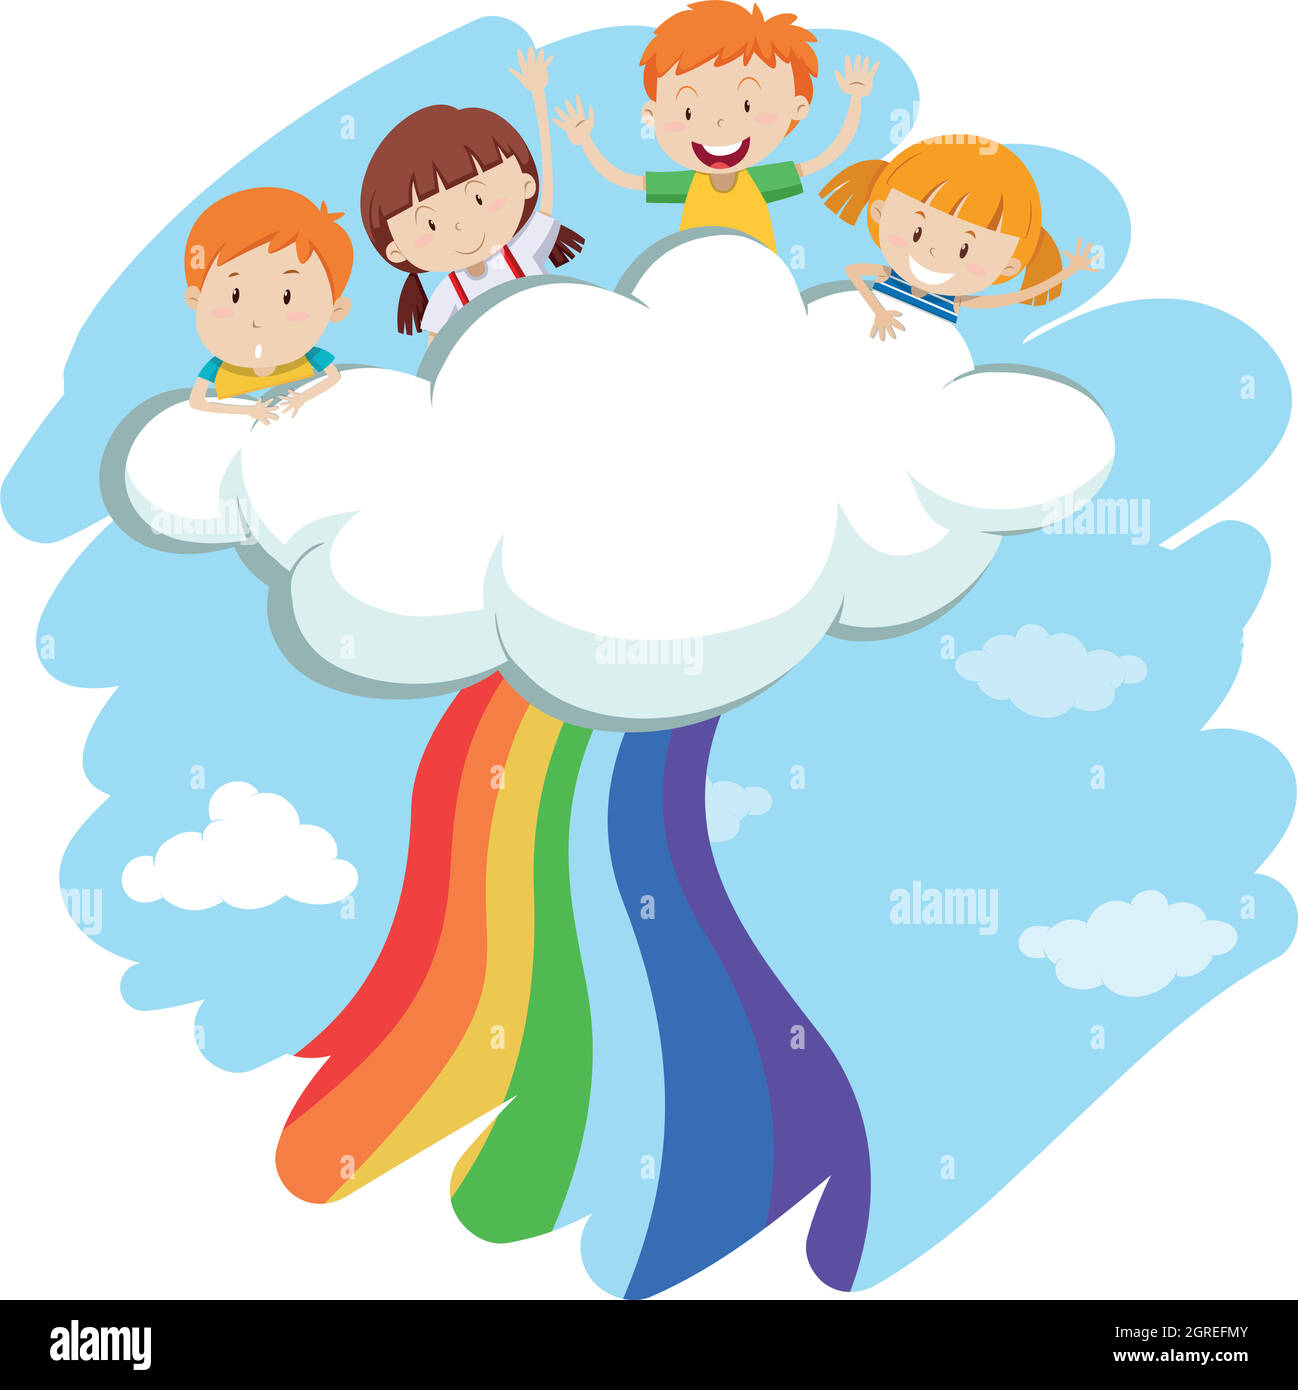 Rainbow image Cut Out Stock Images & Pictures - Alamy